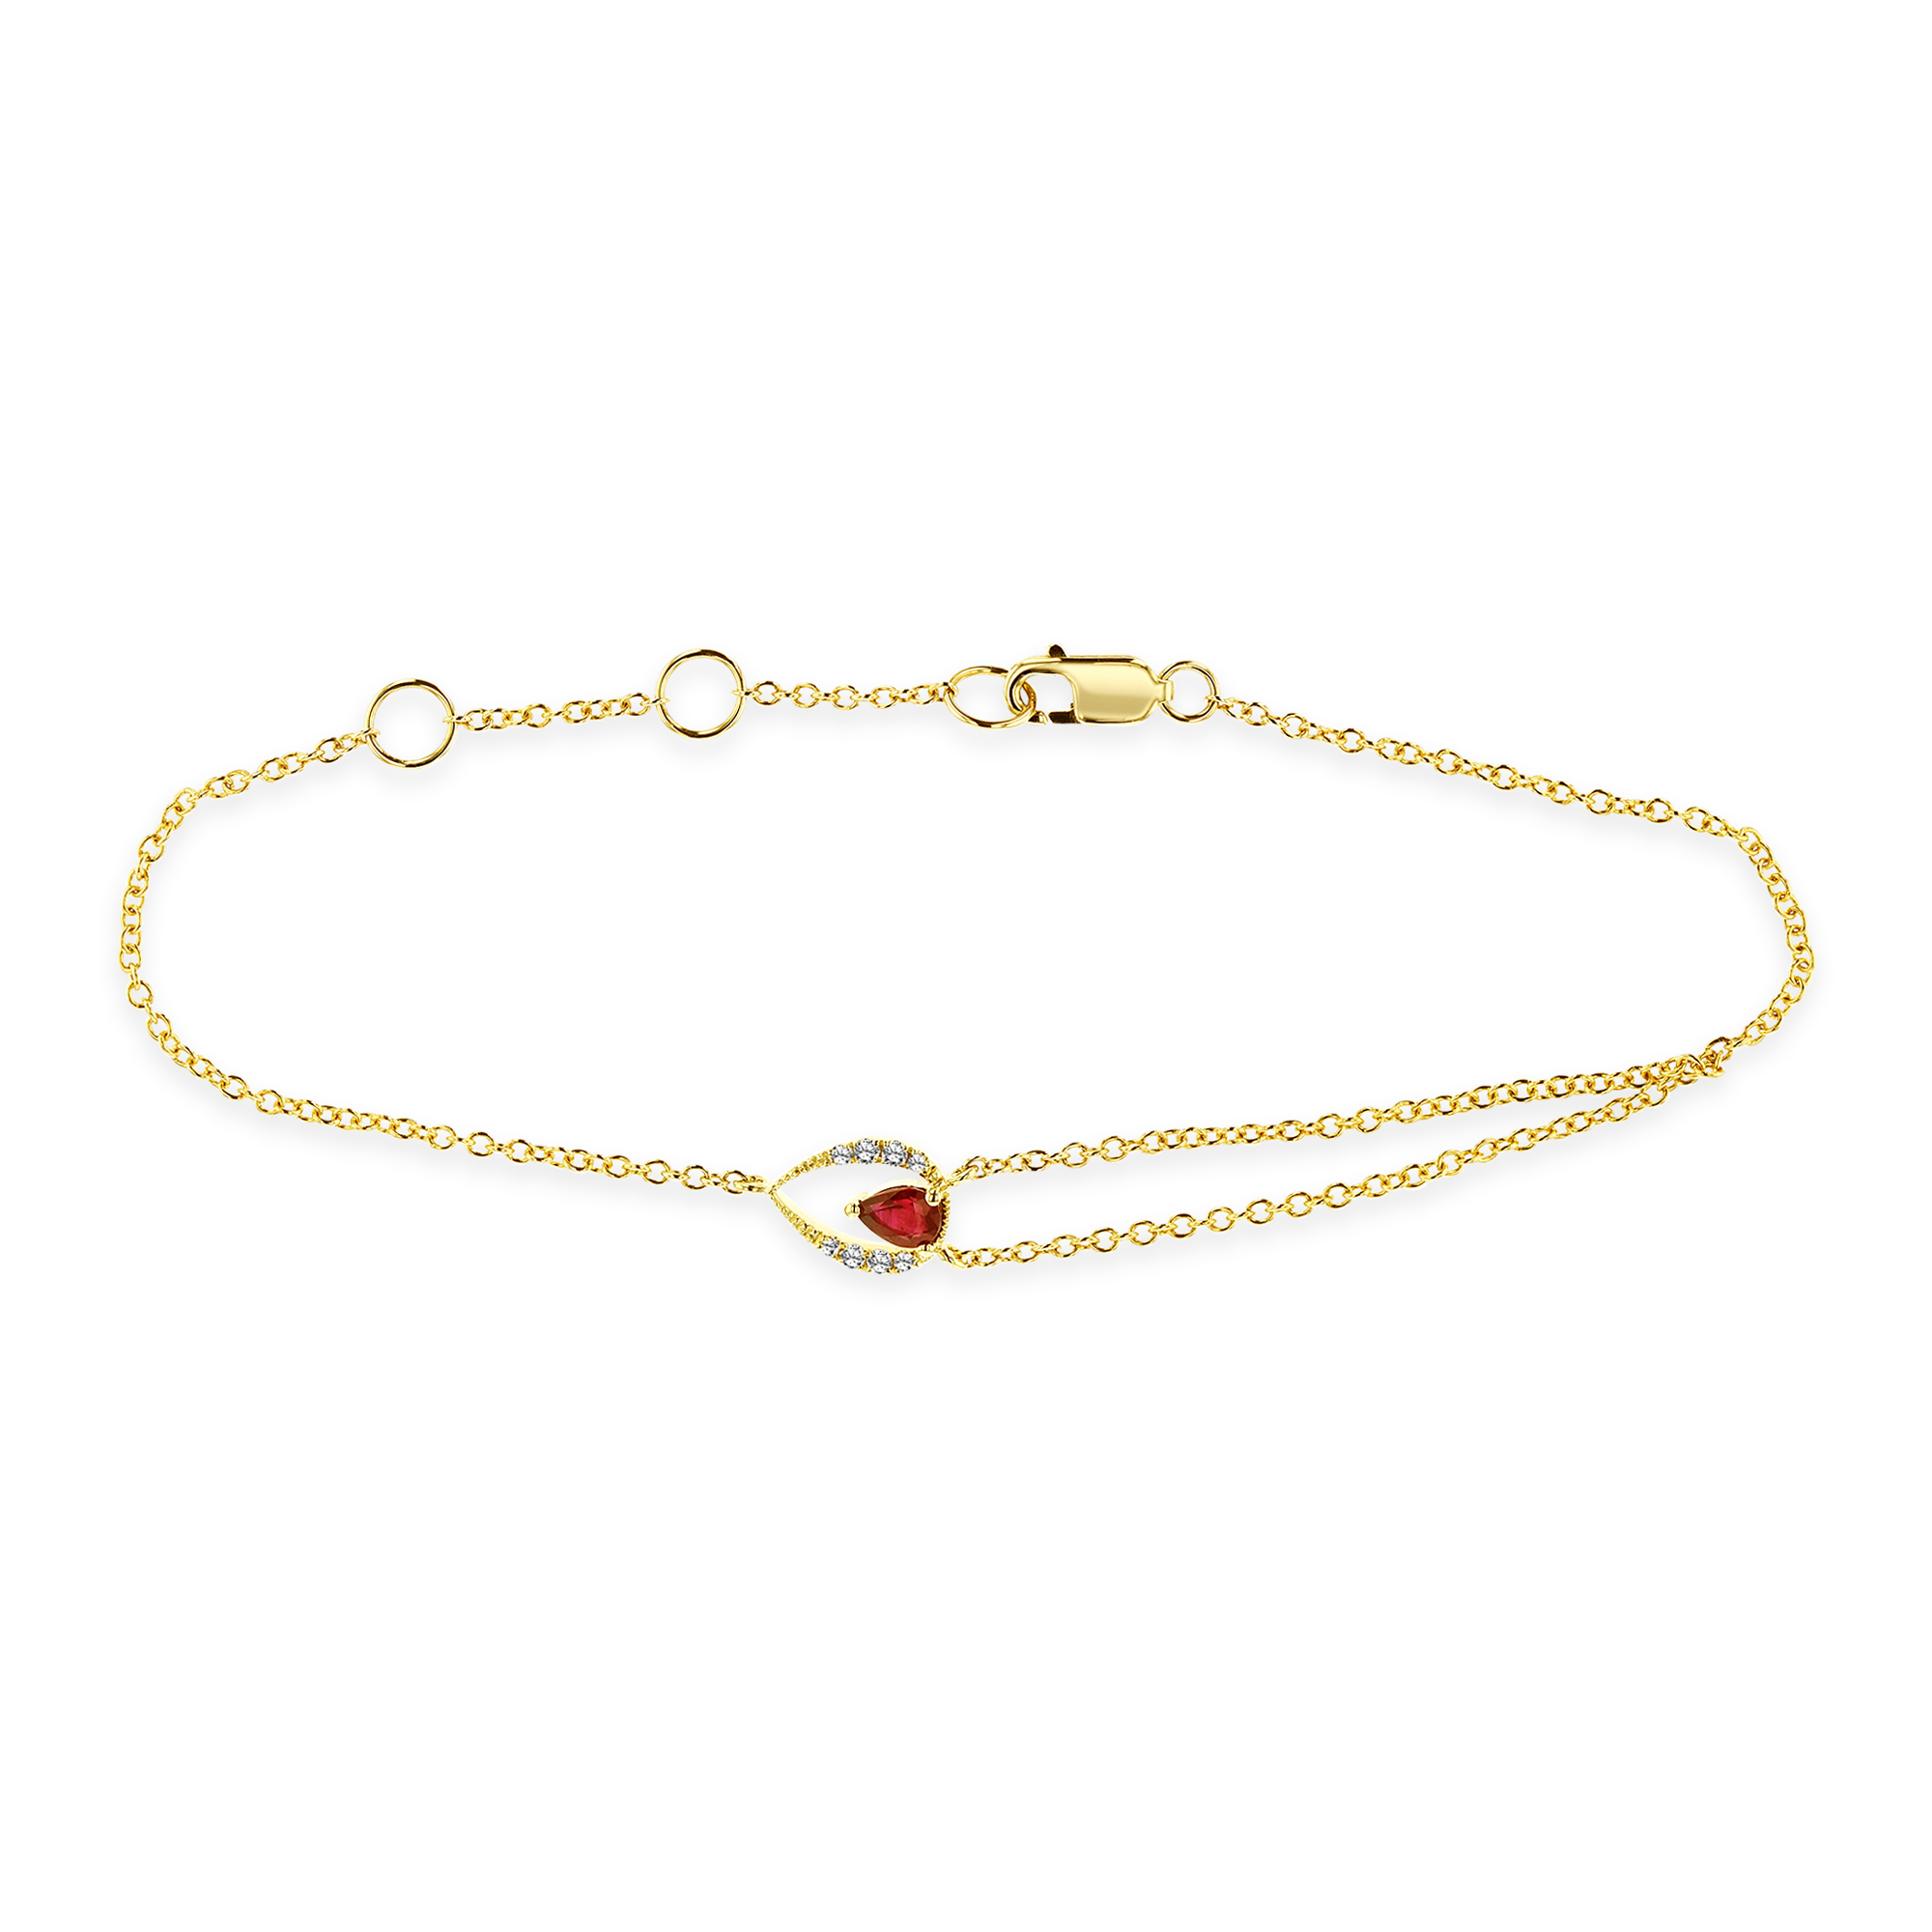 View 0.05ctw Diamond and Ruby Bracelet in 14k Gold